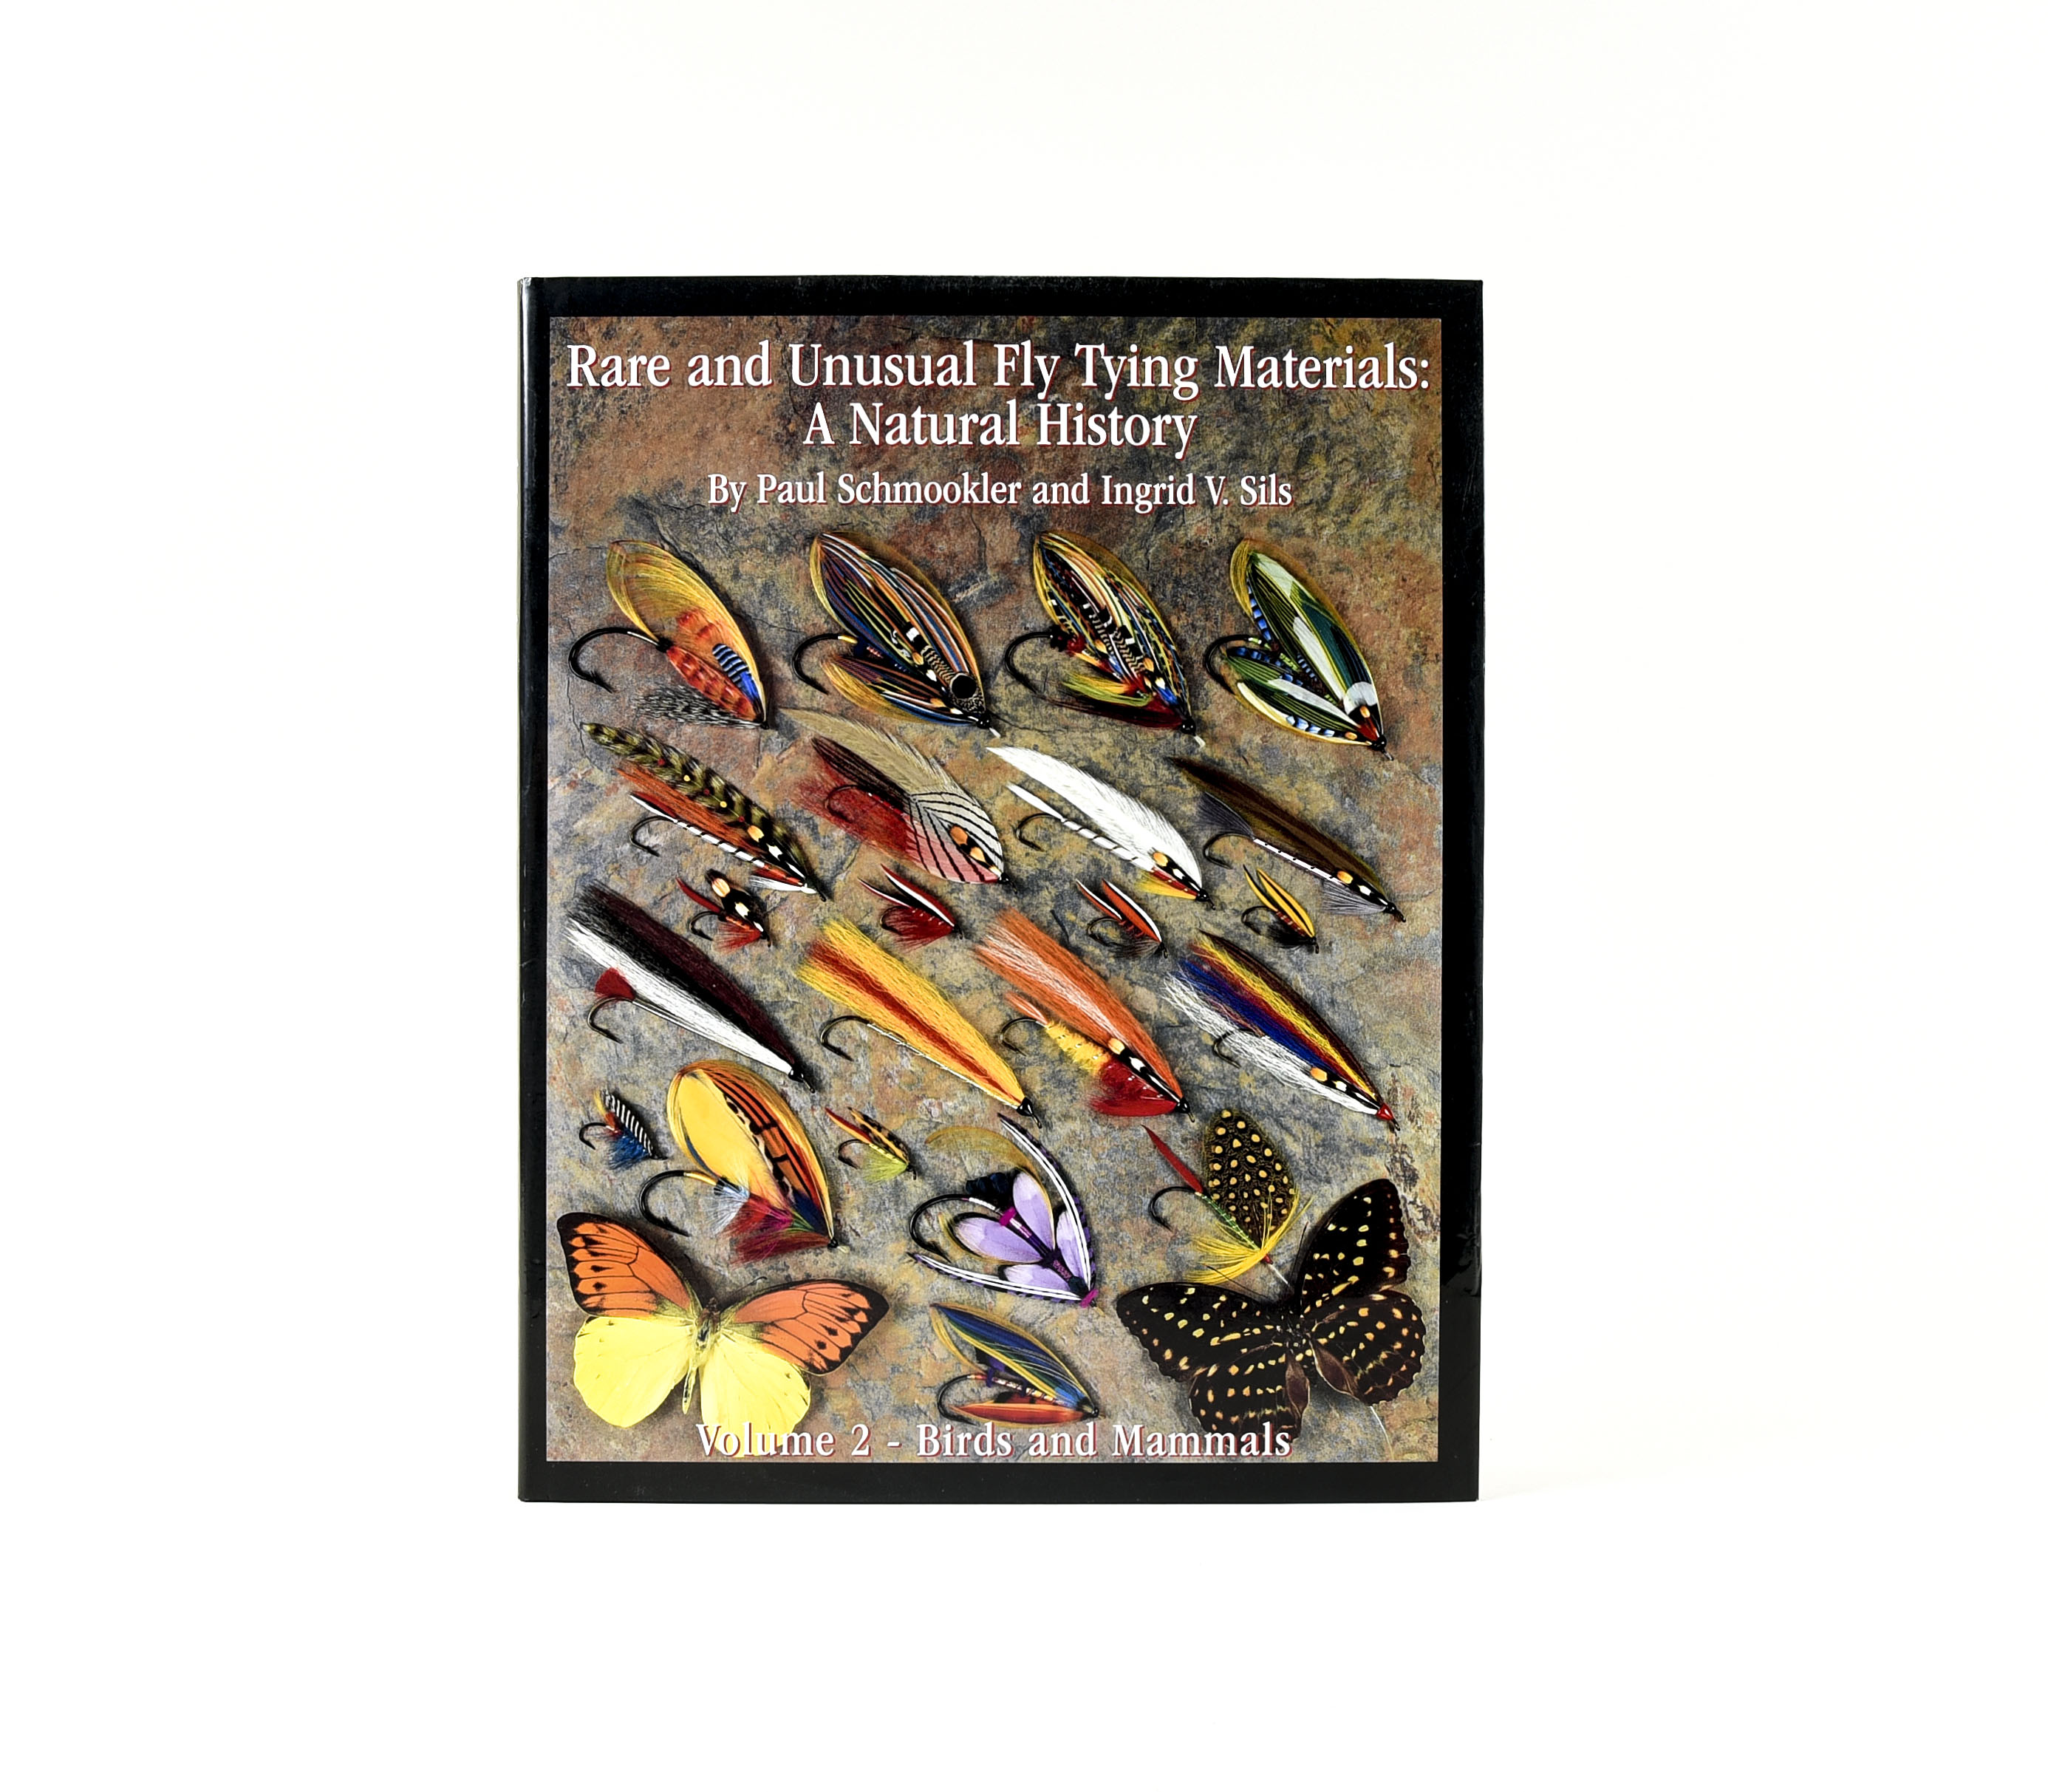 ☆ Rare and Unusual Fly Tying Materials ☆ - 趣味/スポーツ/実用